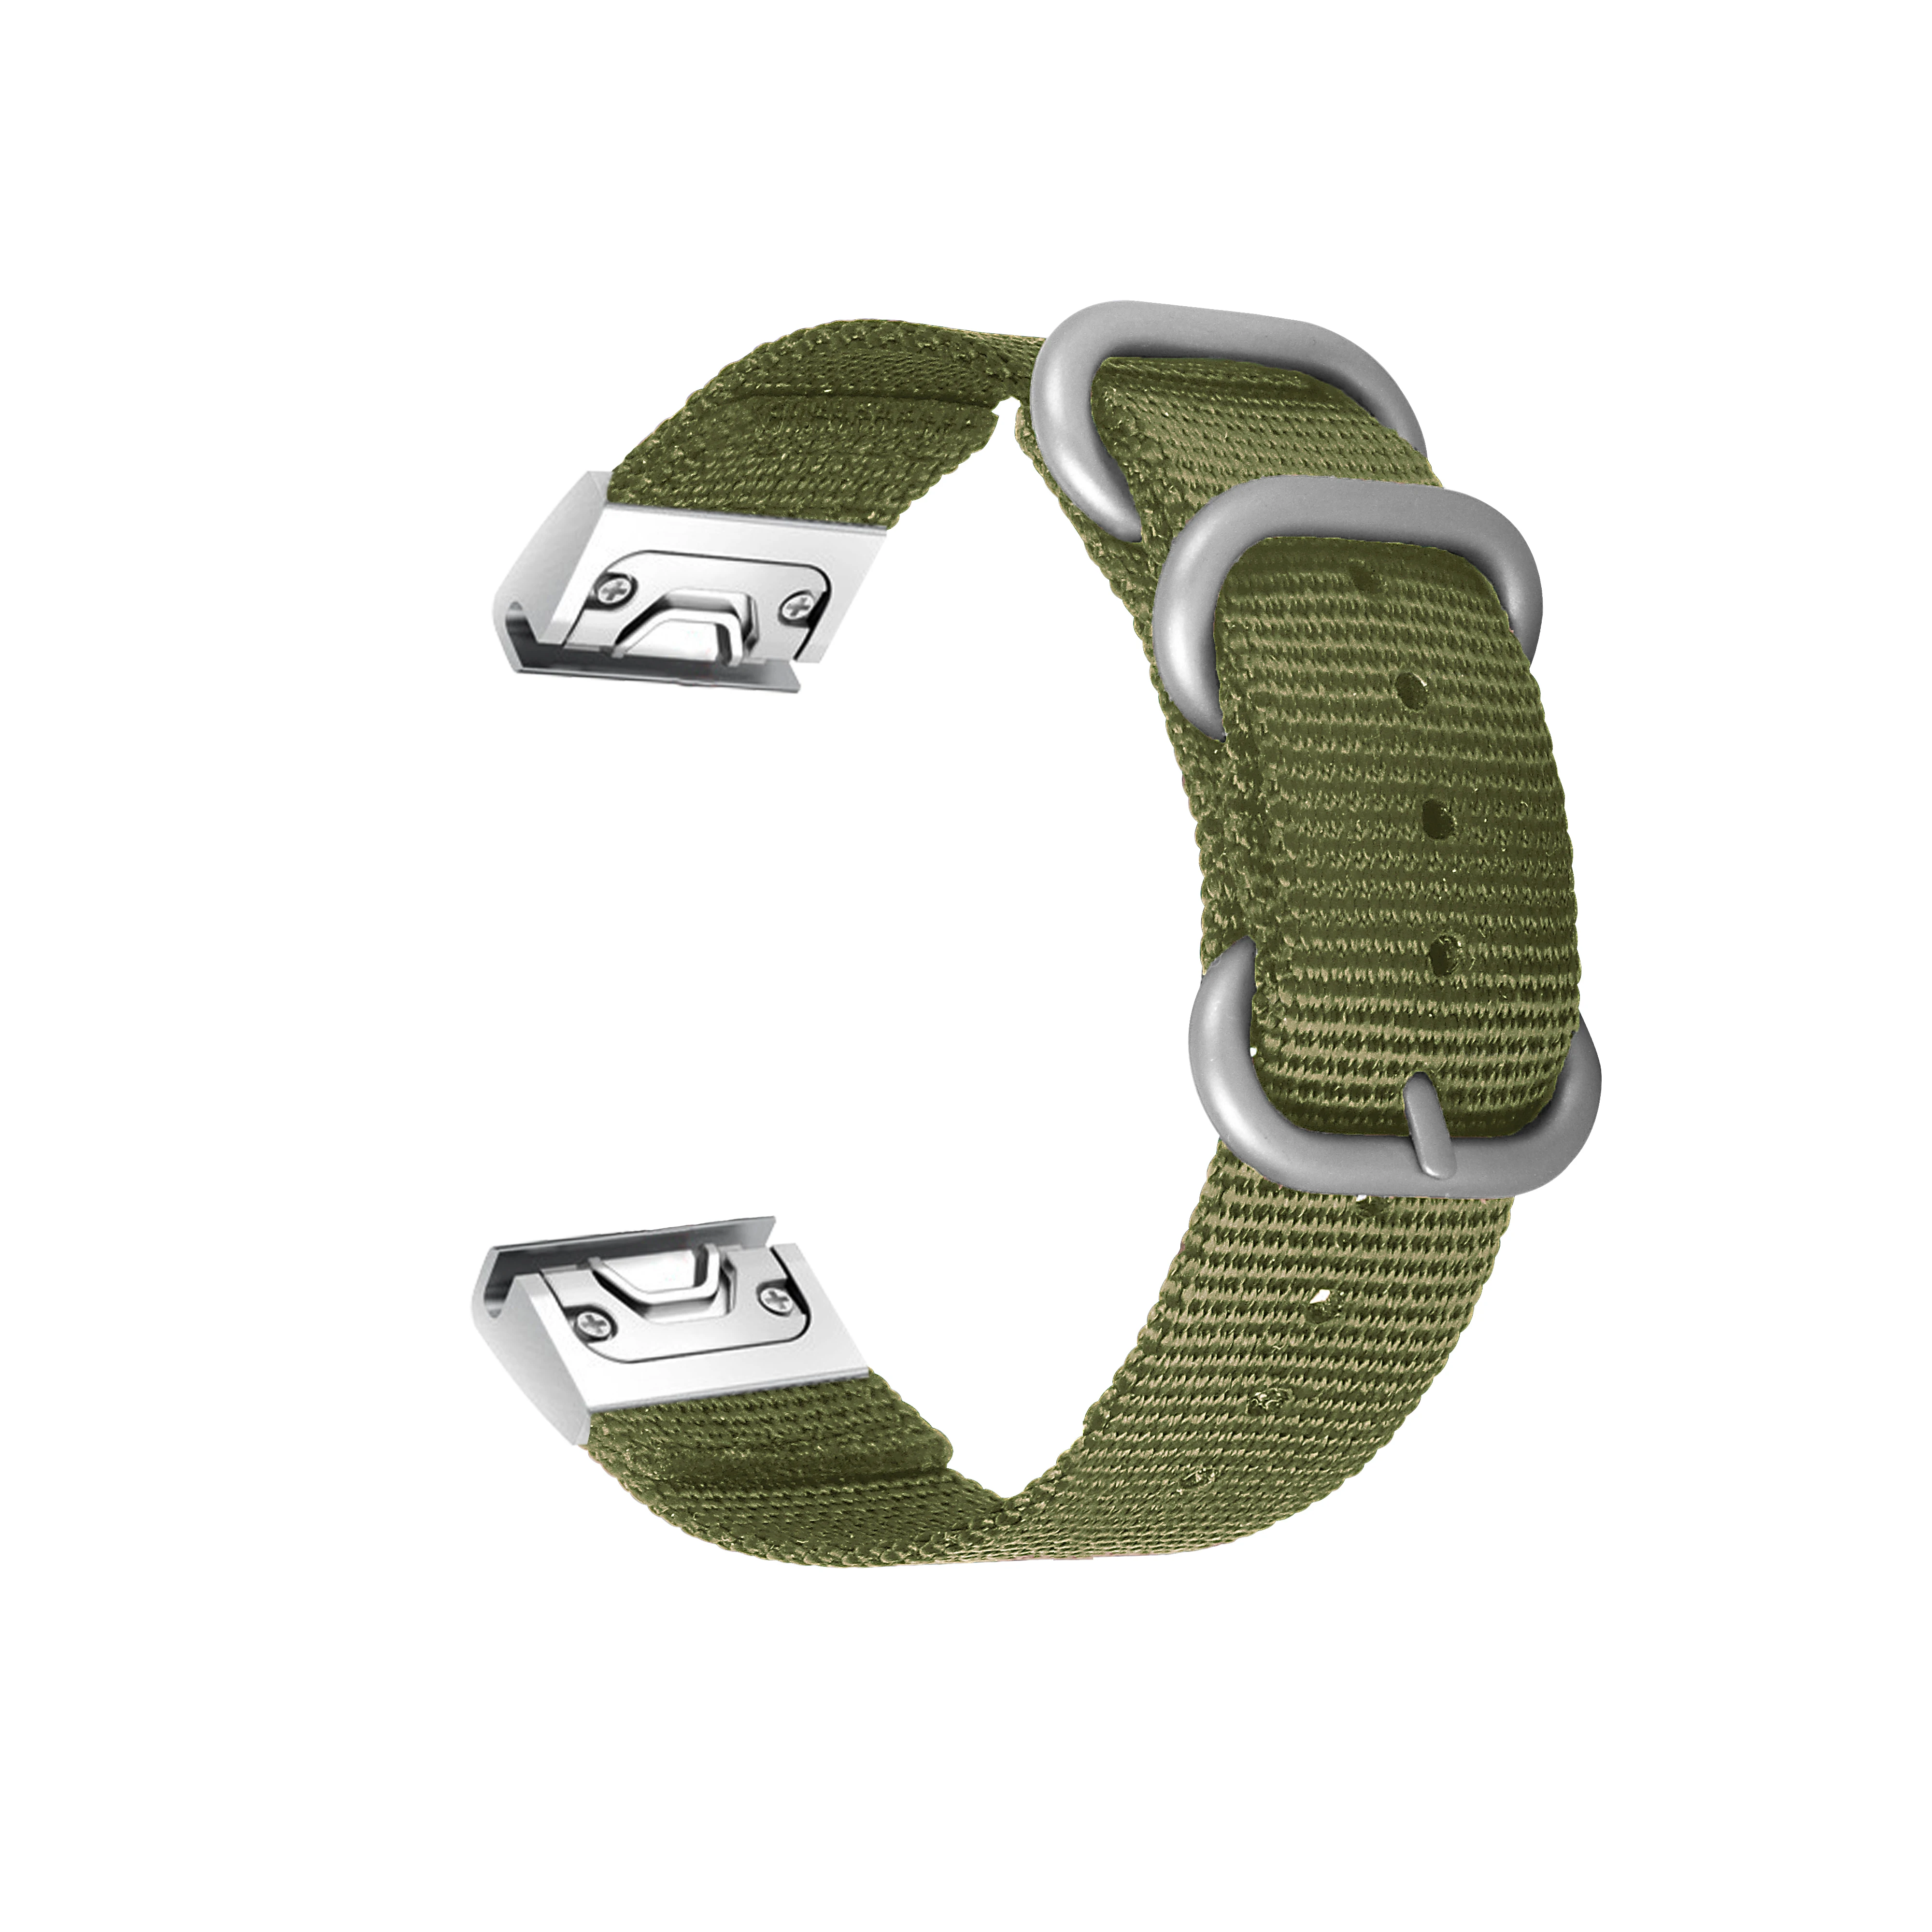 

High Quality Nylon Canvas Woven Quick Release Band With Buckle Strap For 26mm Garmin Fenix 3 5X, 9 colors